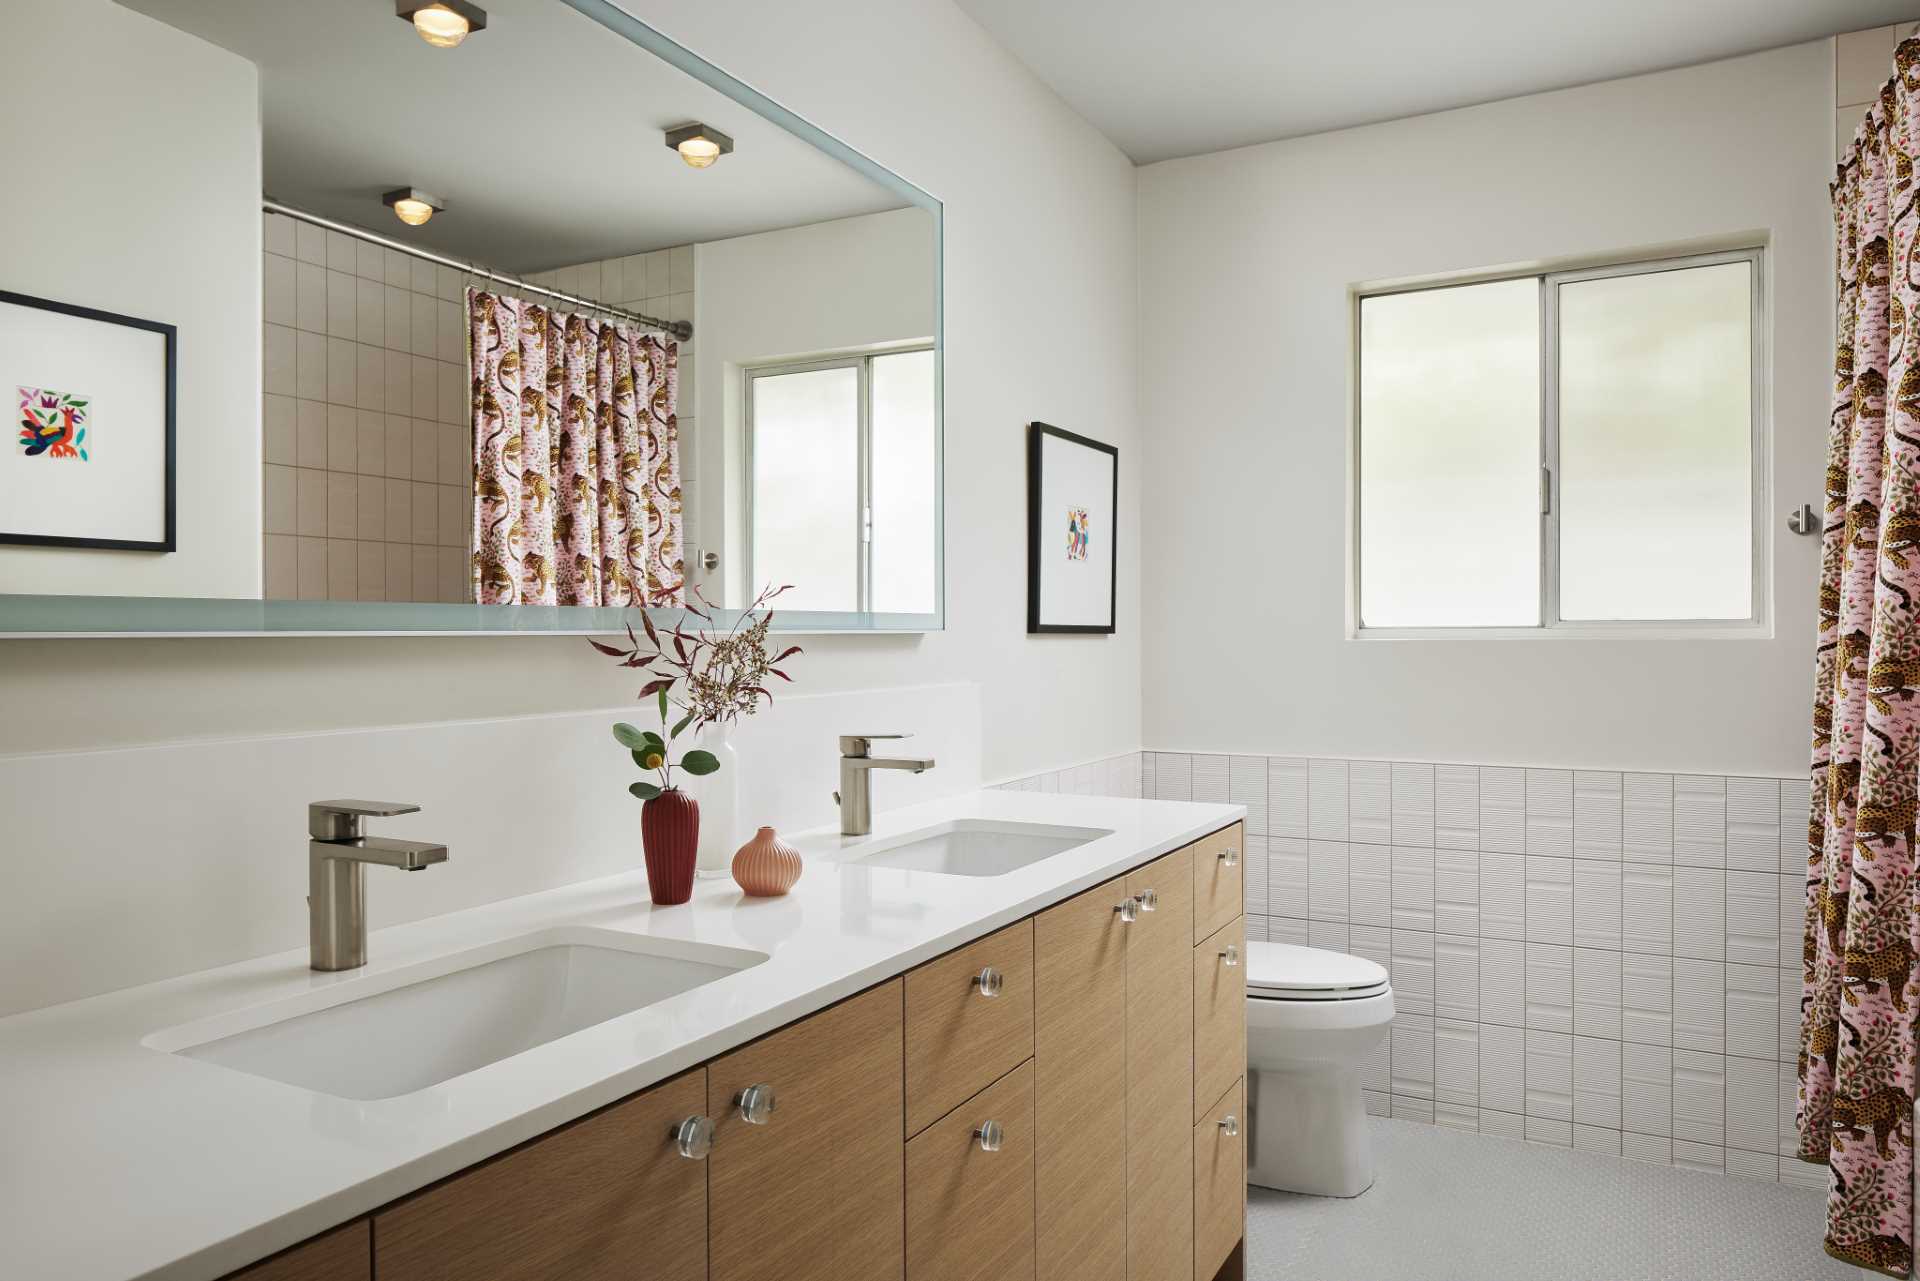 The updated bathroom is bright and open and now includes a double vanity with undermount sinks, a long horizontal mirror, and tile that wraps from the end of the vanity and around the wall to the shower.